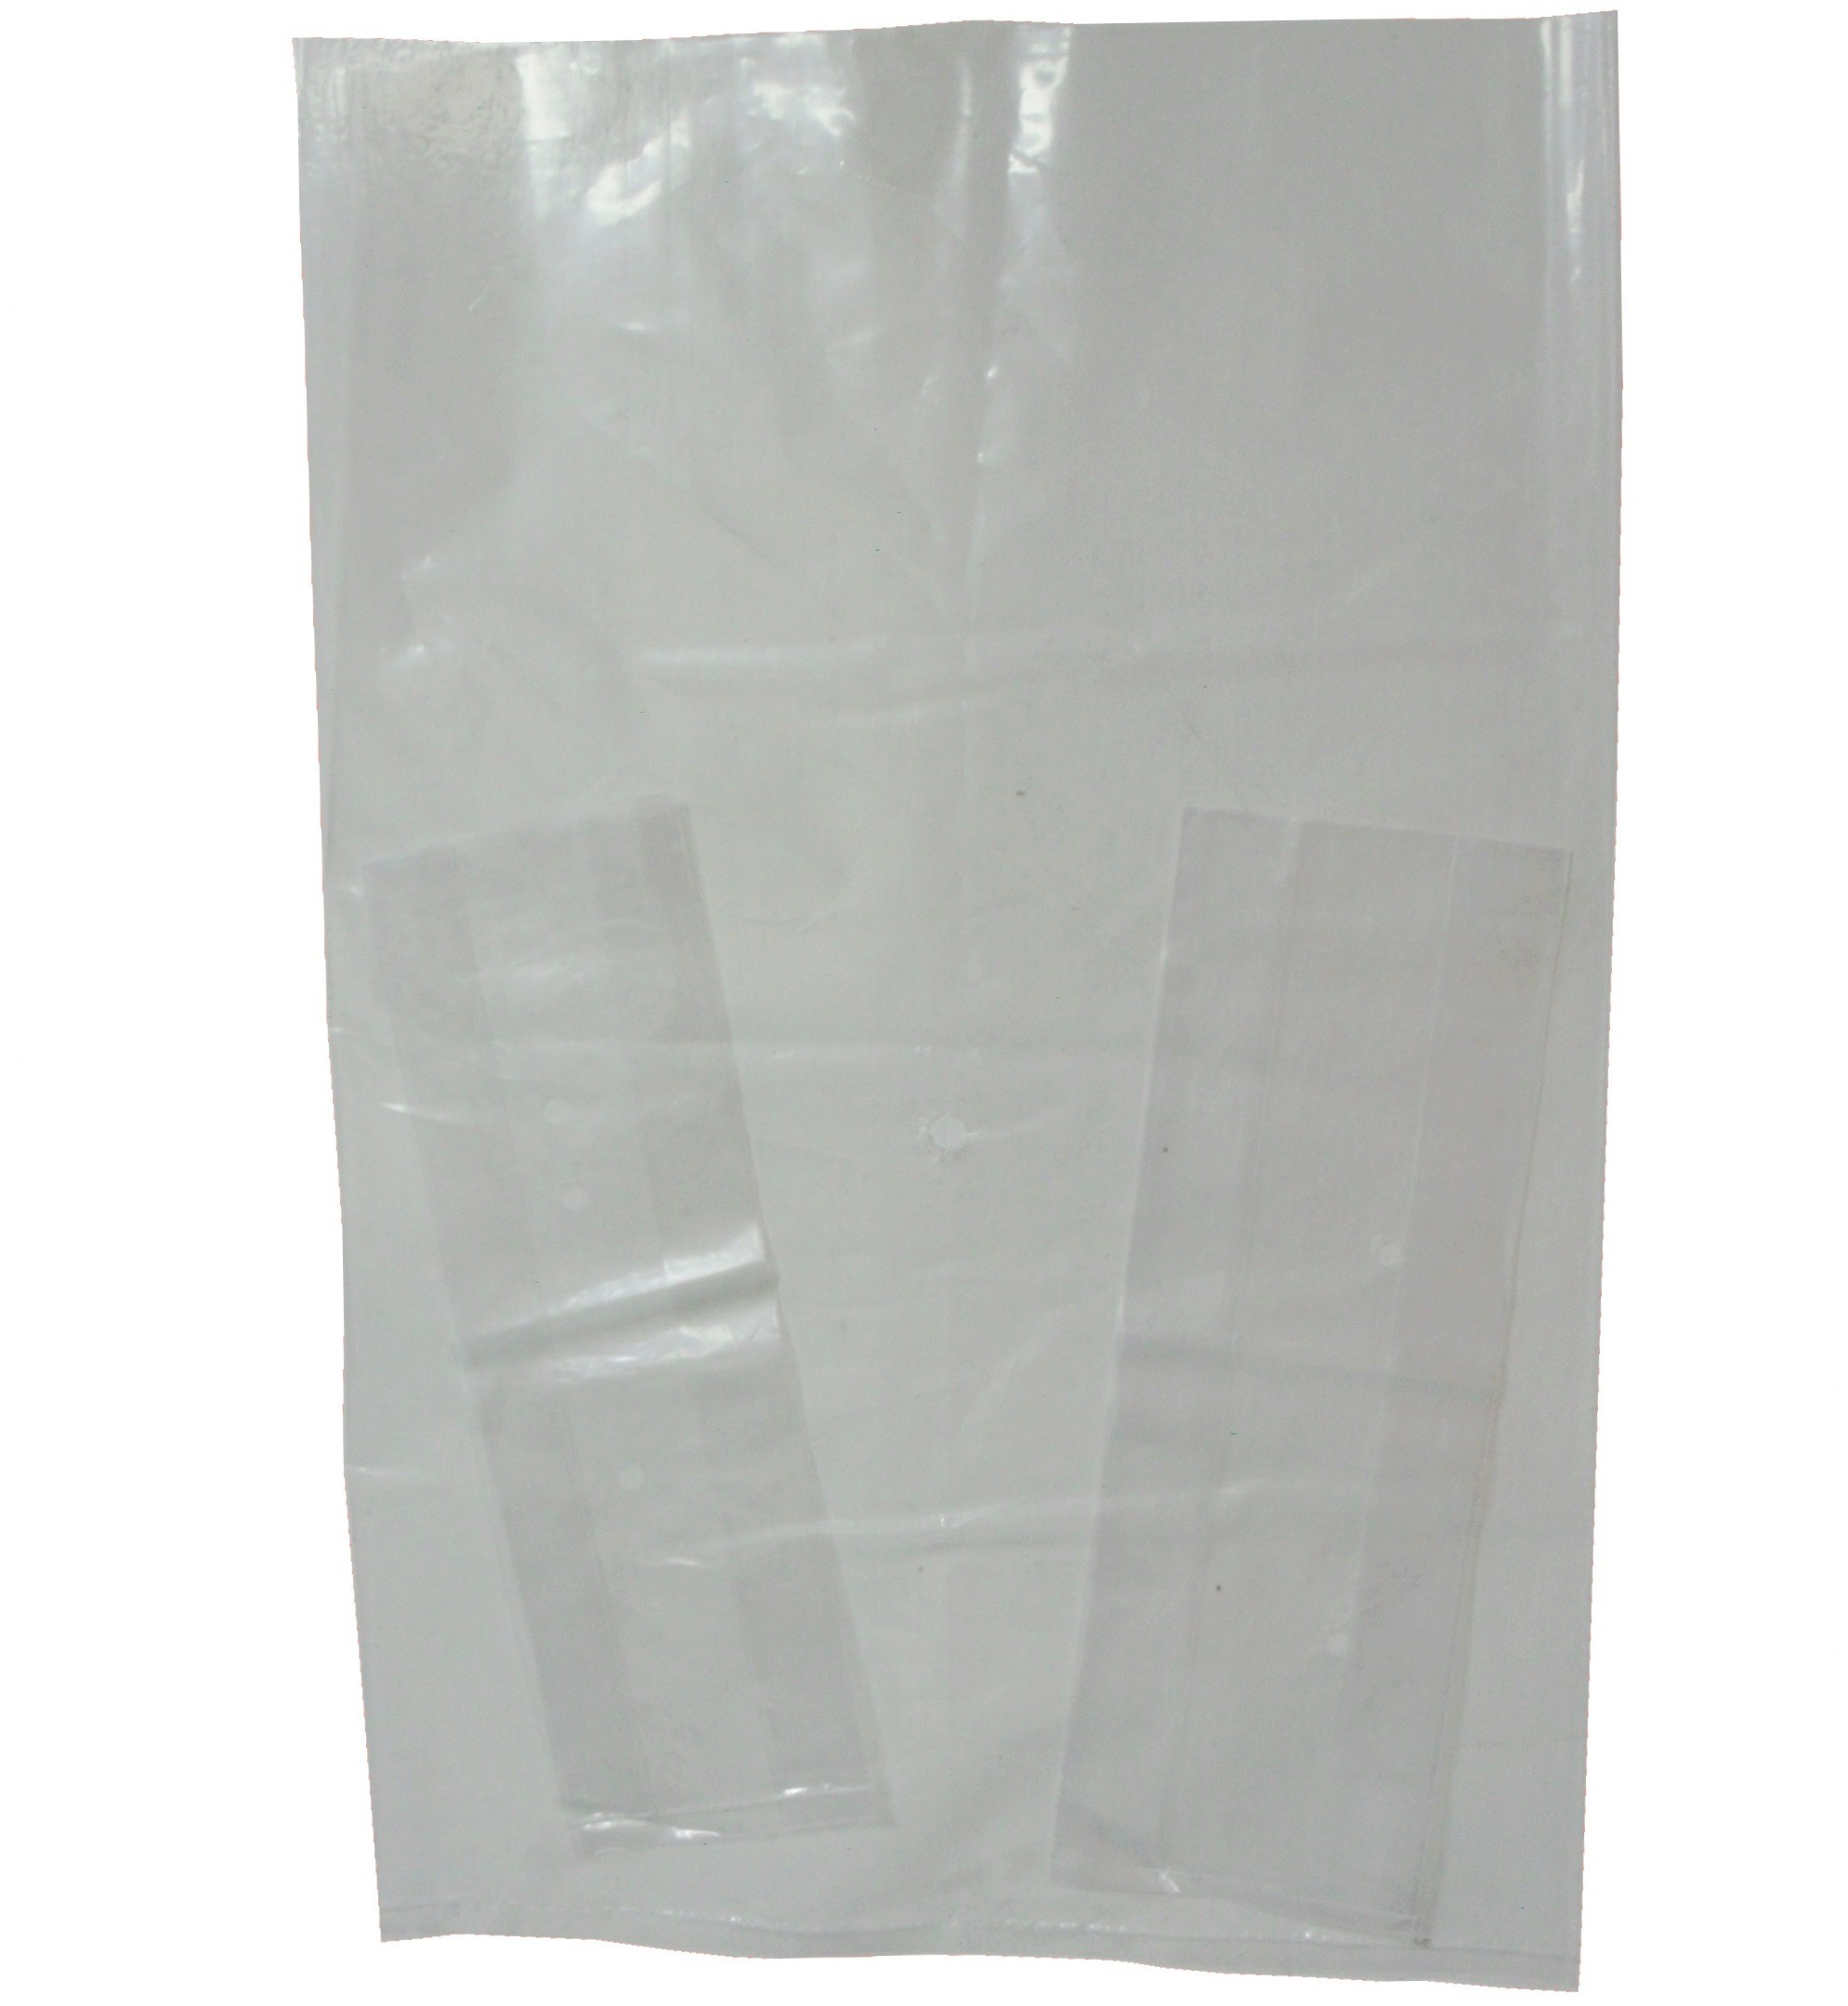 Polypropylene) PP Plastic Bags for Product Repacking, etc. 100pcs. [2x3,  2x4, 2.5x3, 2x4, 3x5, 4x6, 4x8, 5x8, 6x8, 6x10, 6x12, 7x10, 7x12, 8x12,  10x15, 12x18] | Lazada PH